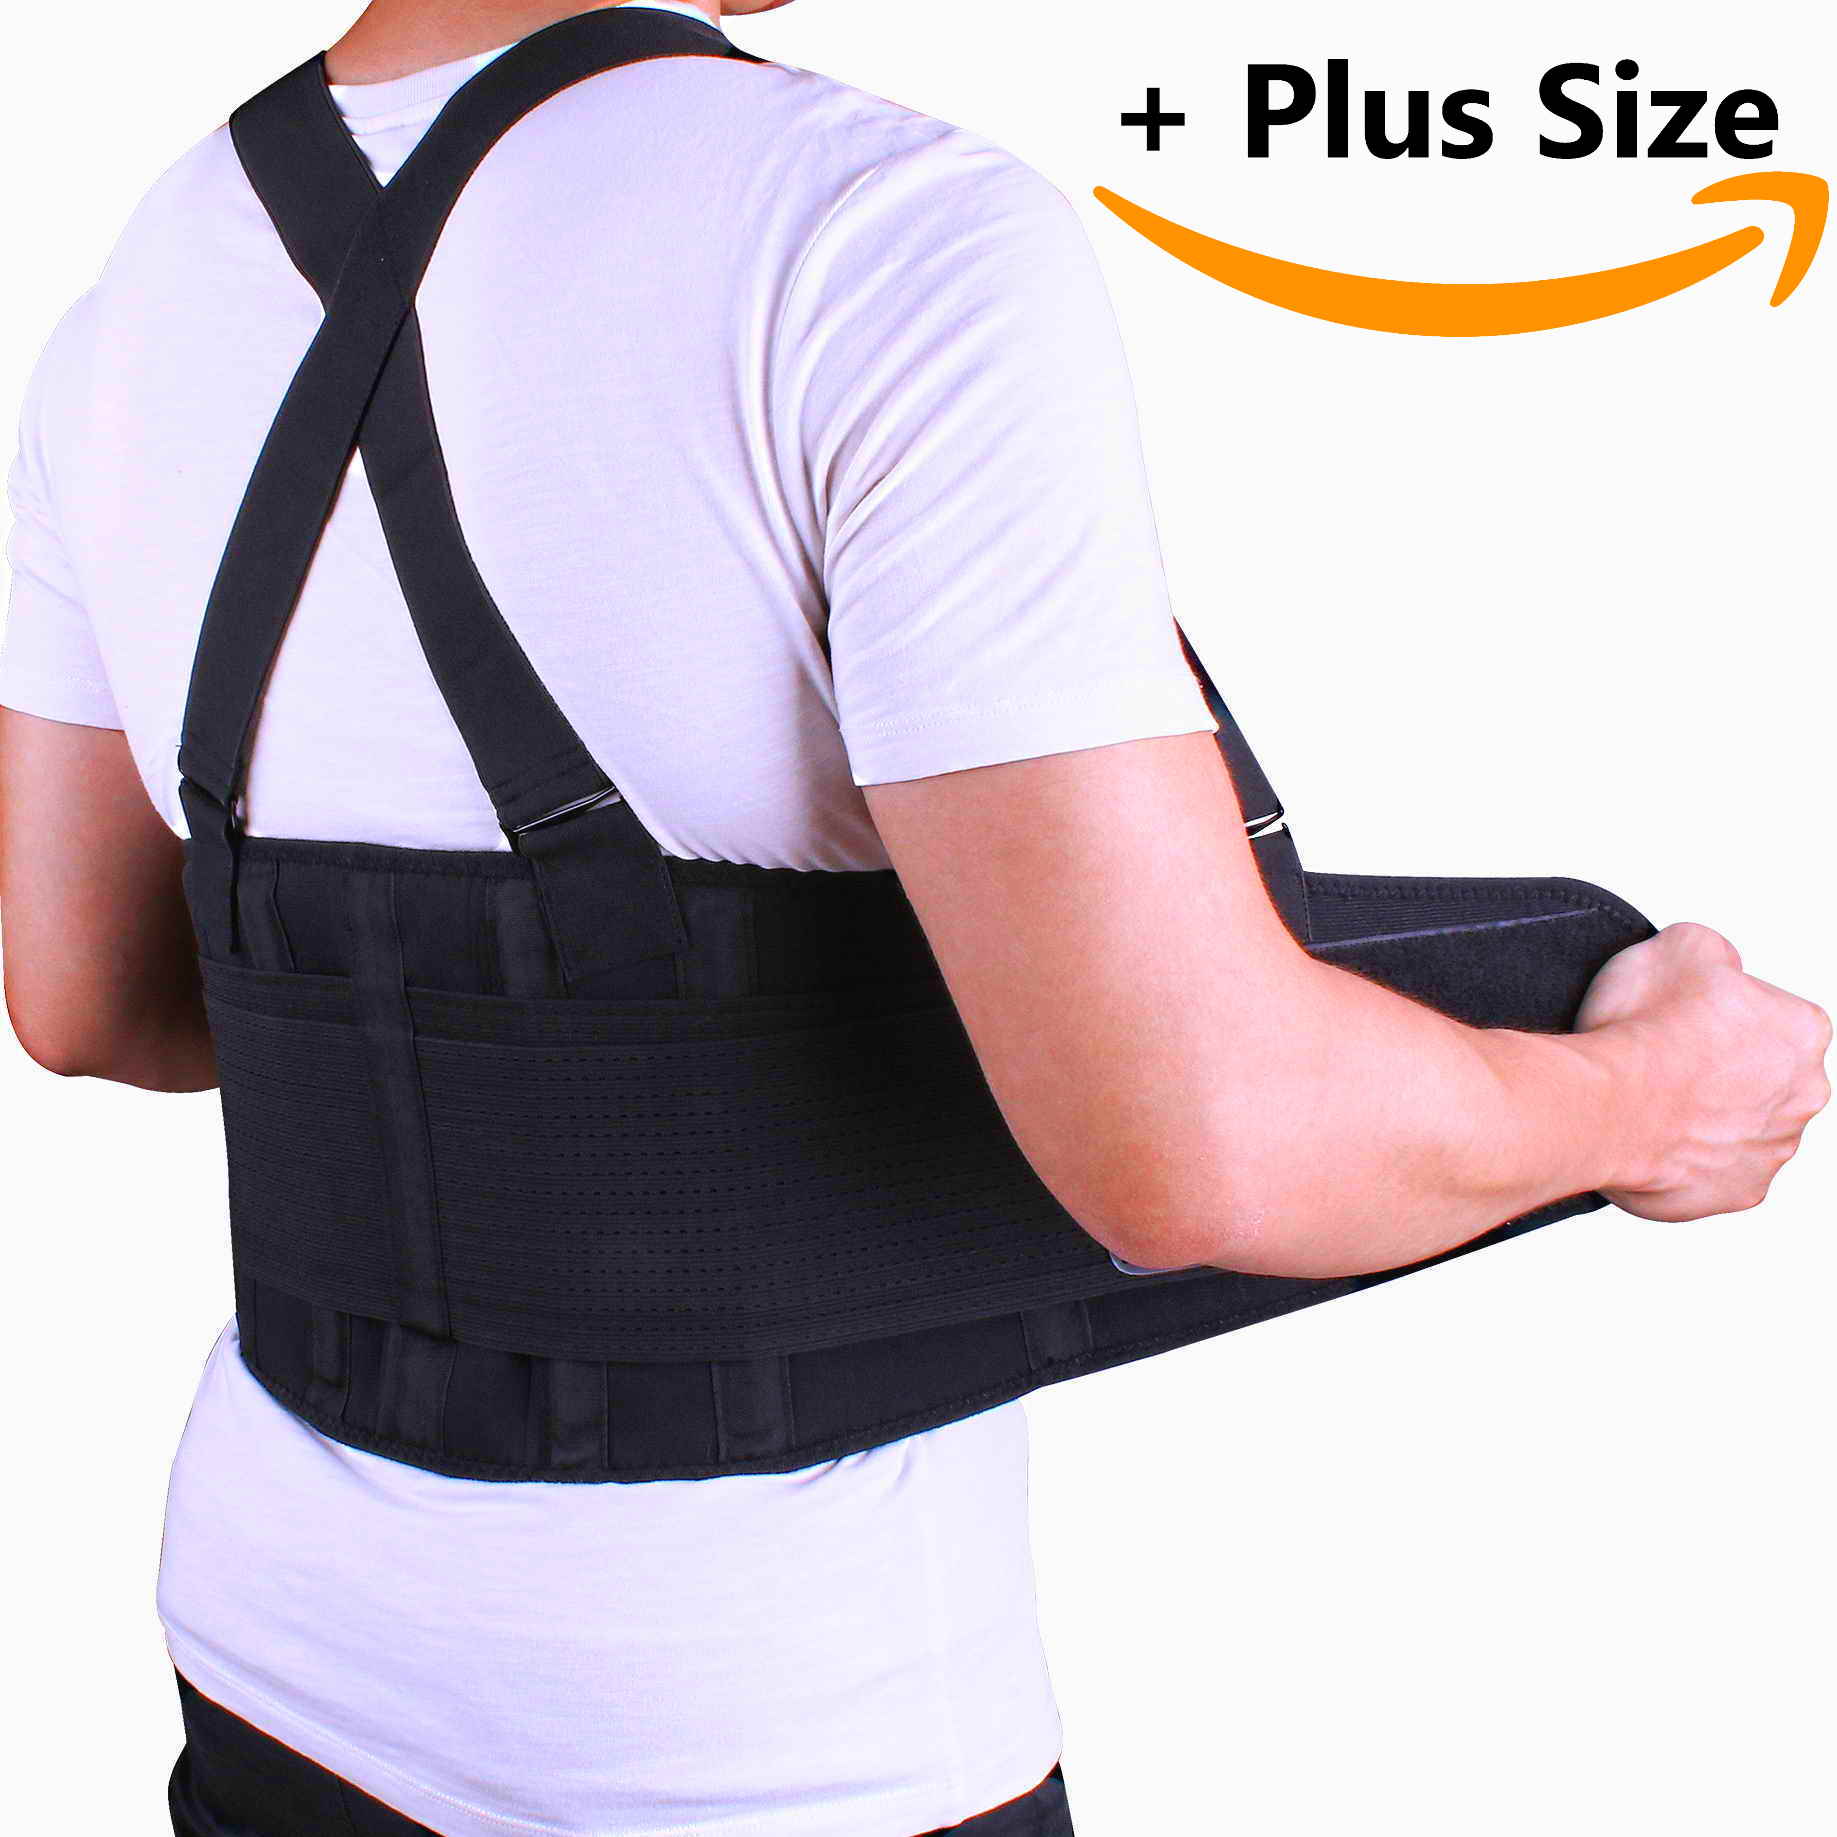 Lower Back Brace with Suspenders in PLUS SIZE